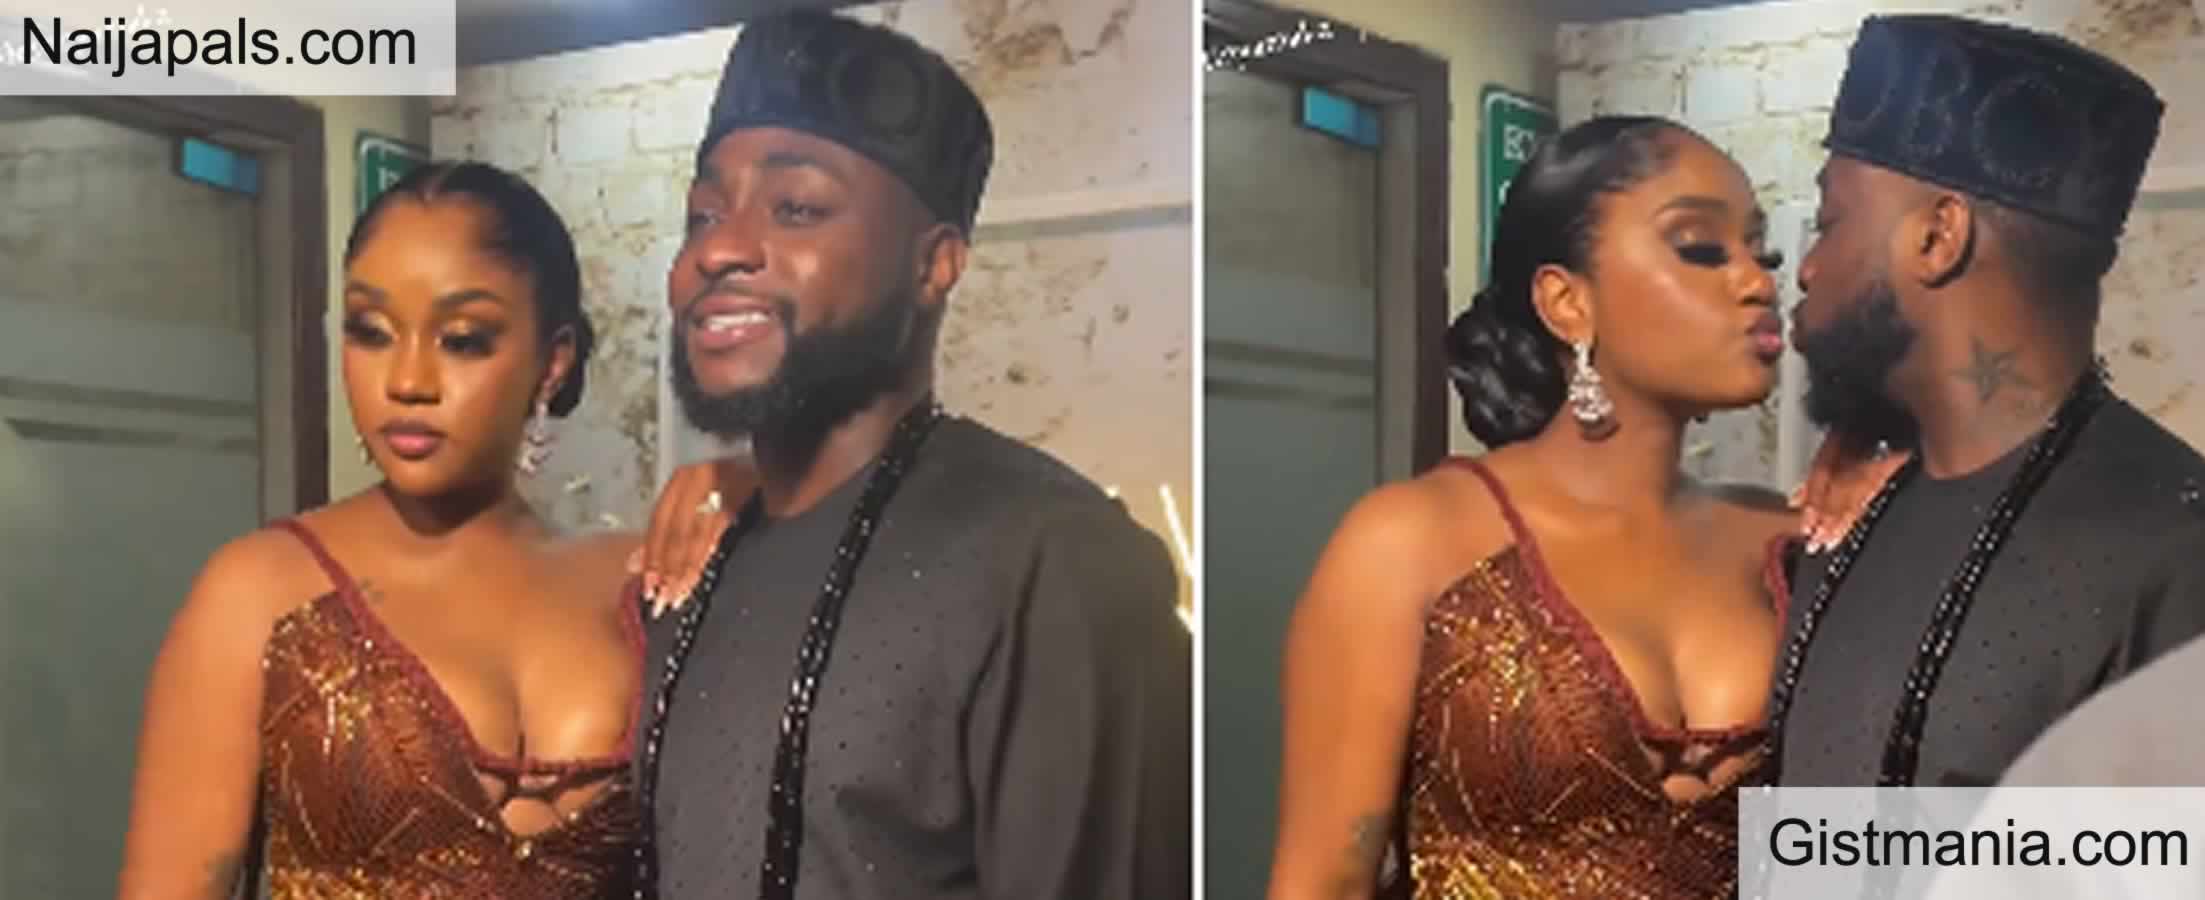 Nigerian Lady Heartbroken As Davido Marries Chioma, Throws Out Singer’s Frame